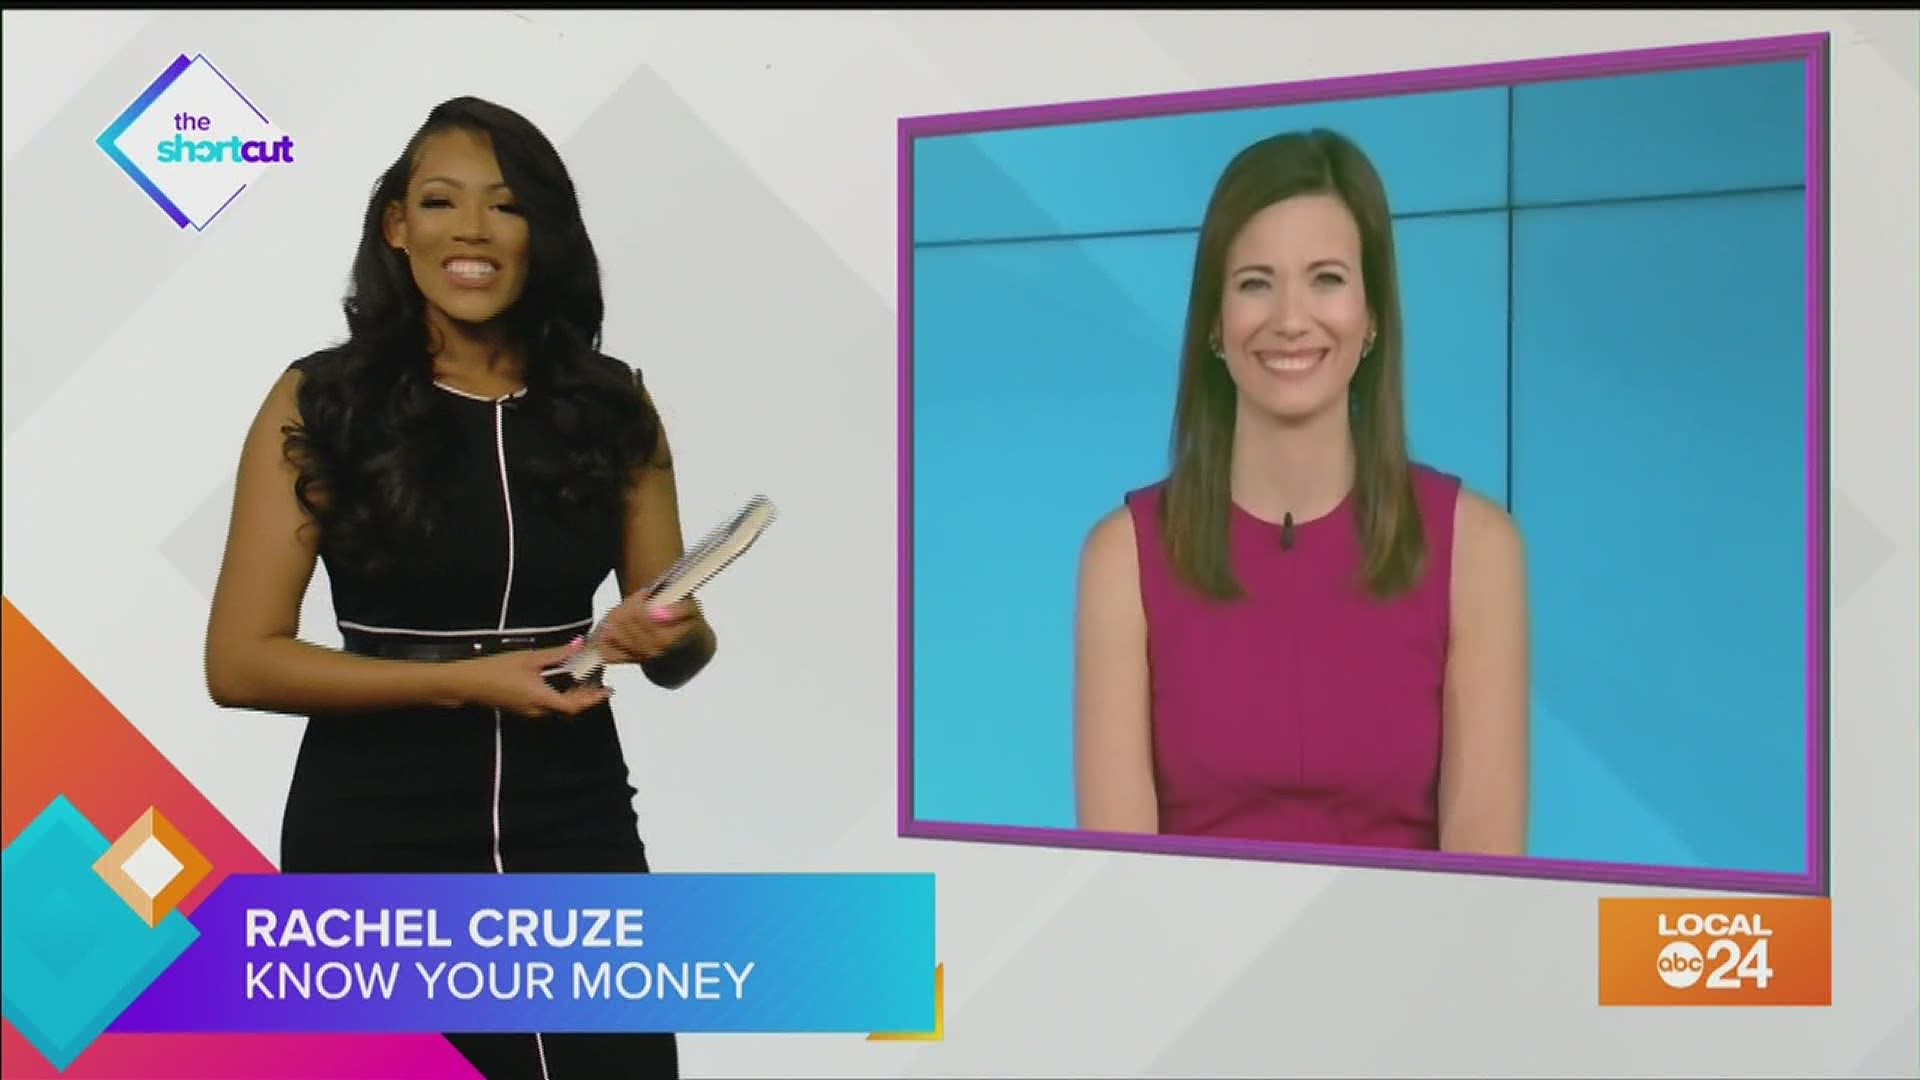 Financial tips with Rachel Cruze on today's The Shortcut. Join the conversation.